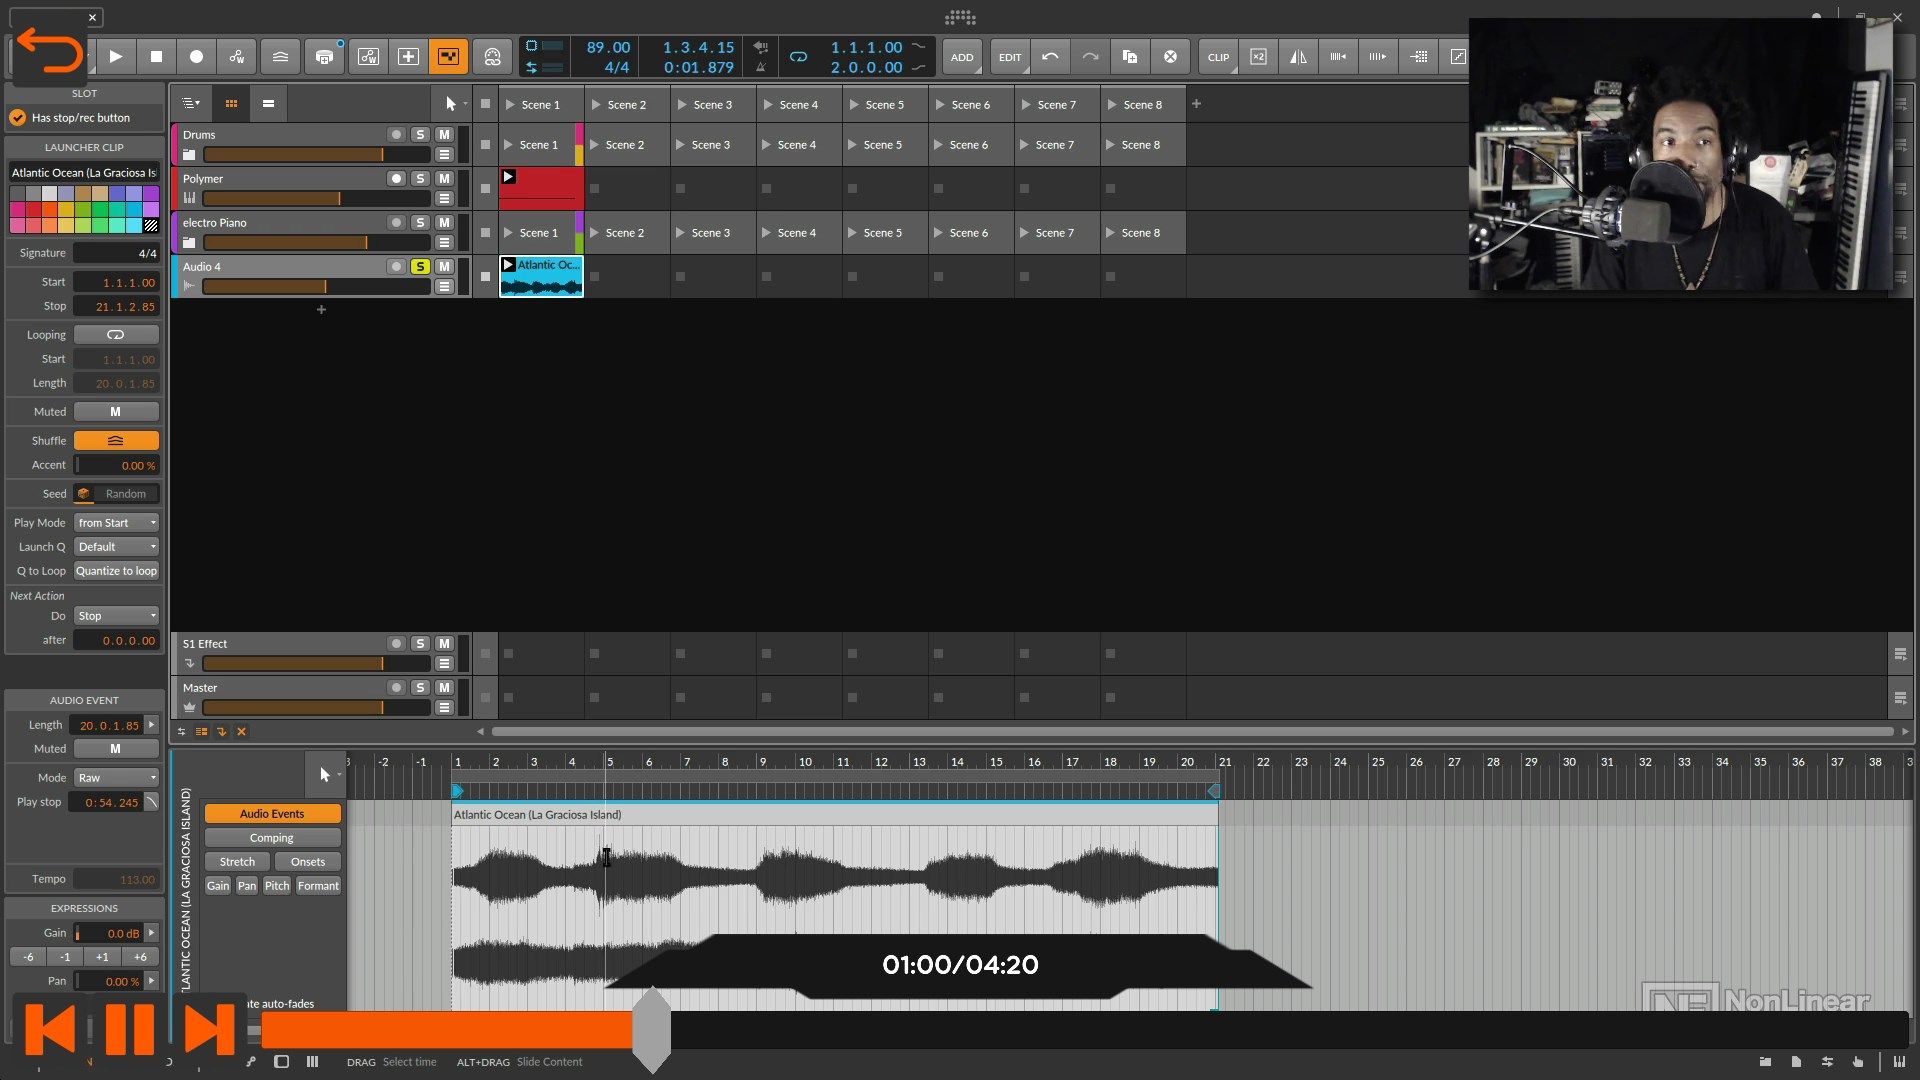 Adv Production Workflows for BitWig Studio